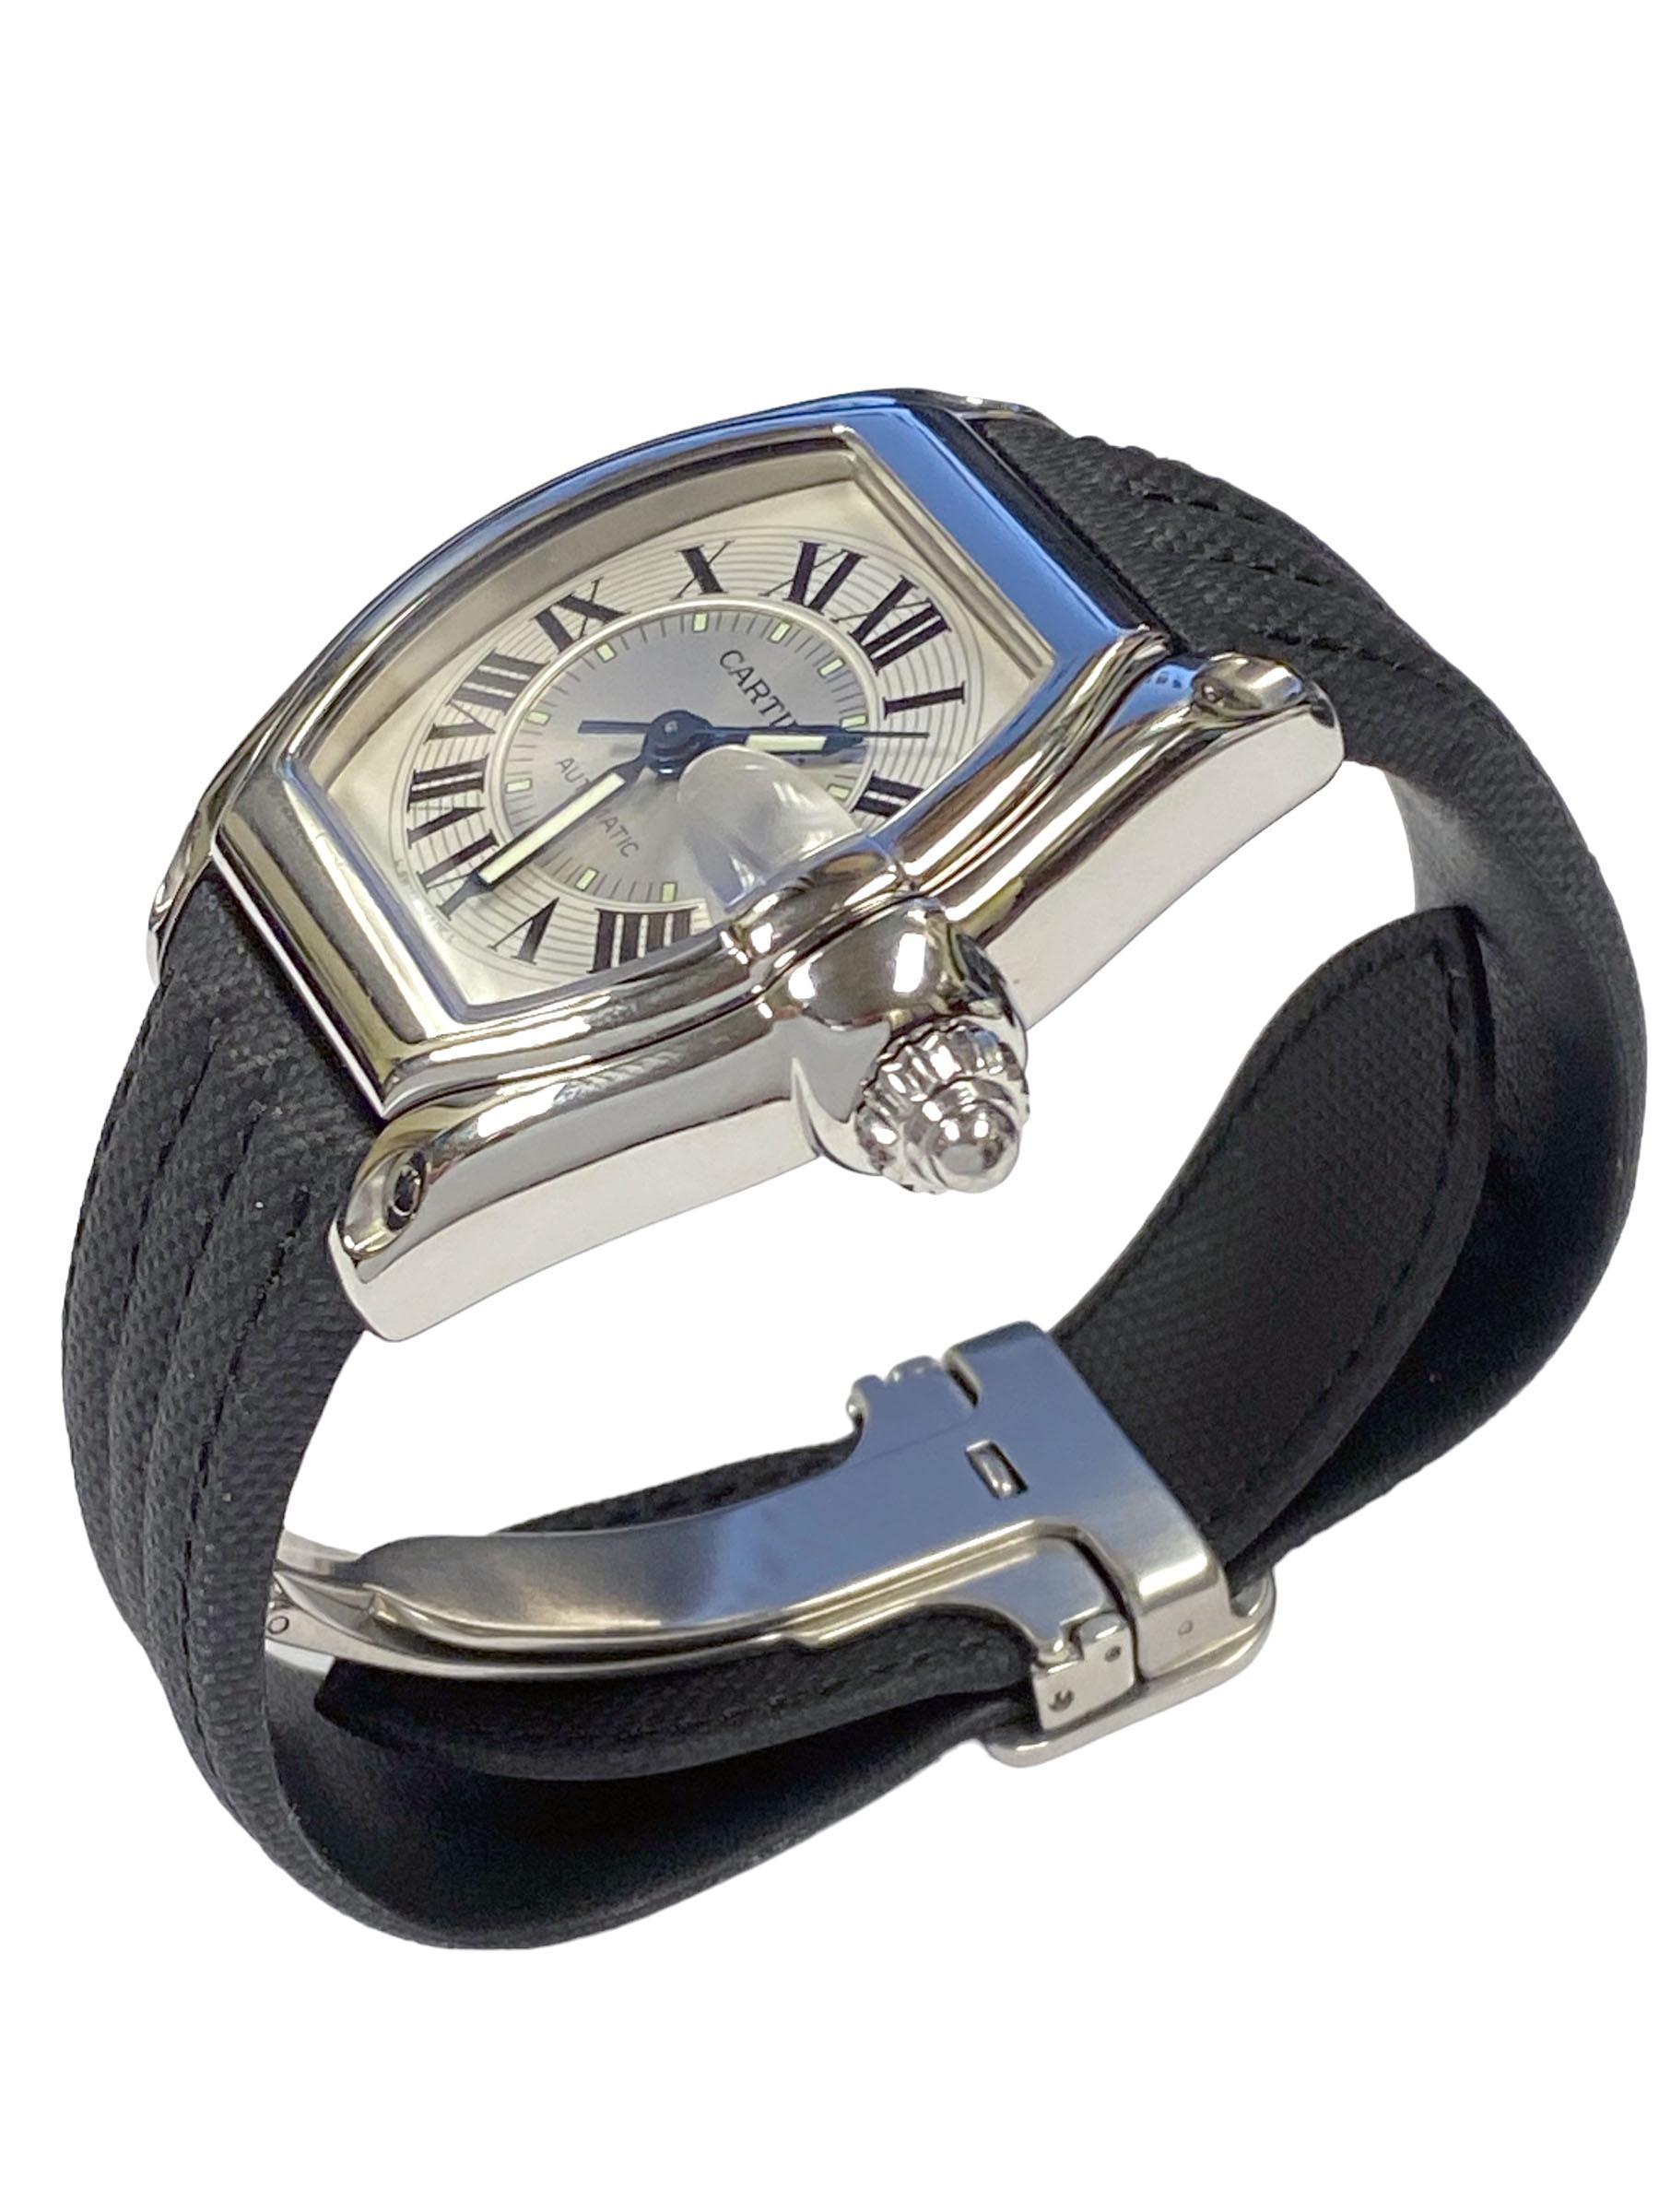 Circa 2010 Cartier Roadster Reference 2510 Wrist Watch, 34 X 37 M.M. Stainless Steel 2 piece Water Resistant case. Automatic, Self winding movement. Silver Satin Double Sunk dial with Black Roman Numerals, sweep seconds hand and a Calendar window at